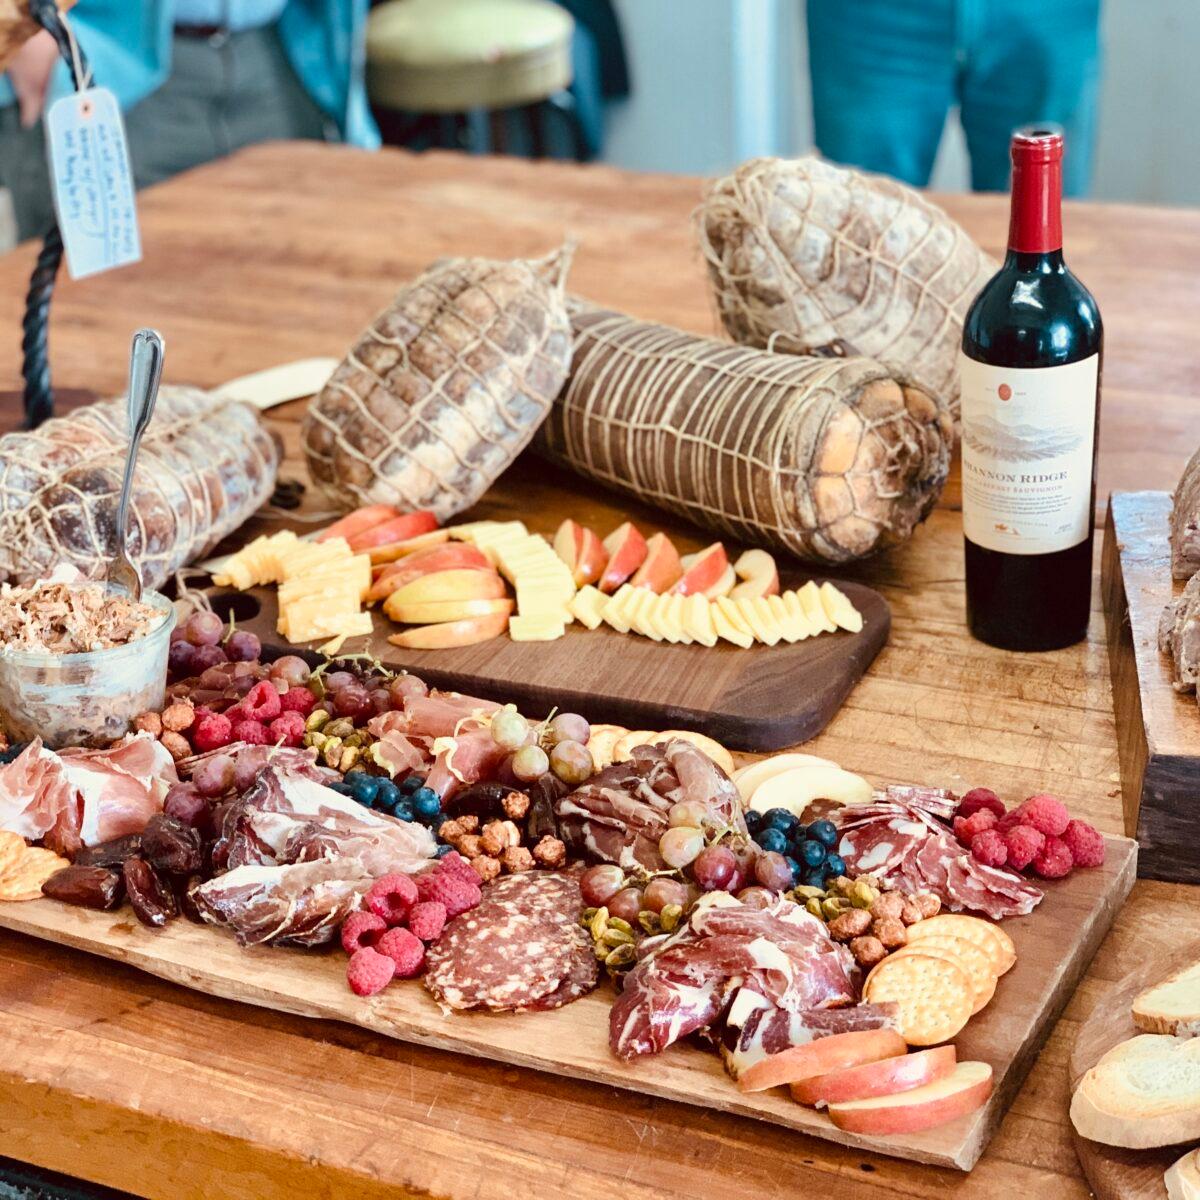 A charcuterie spread provided by Hand Hewn Farm for a workshop shows students the culinary uses of cured meat. (Courtesy of Hand Hewn Farm)